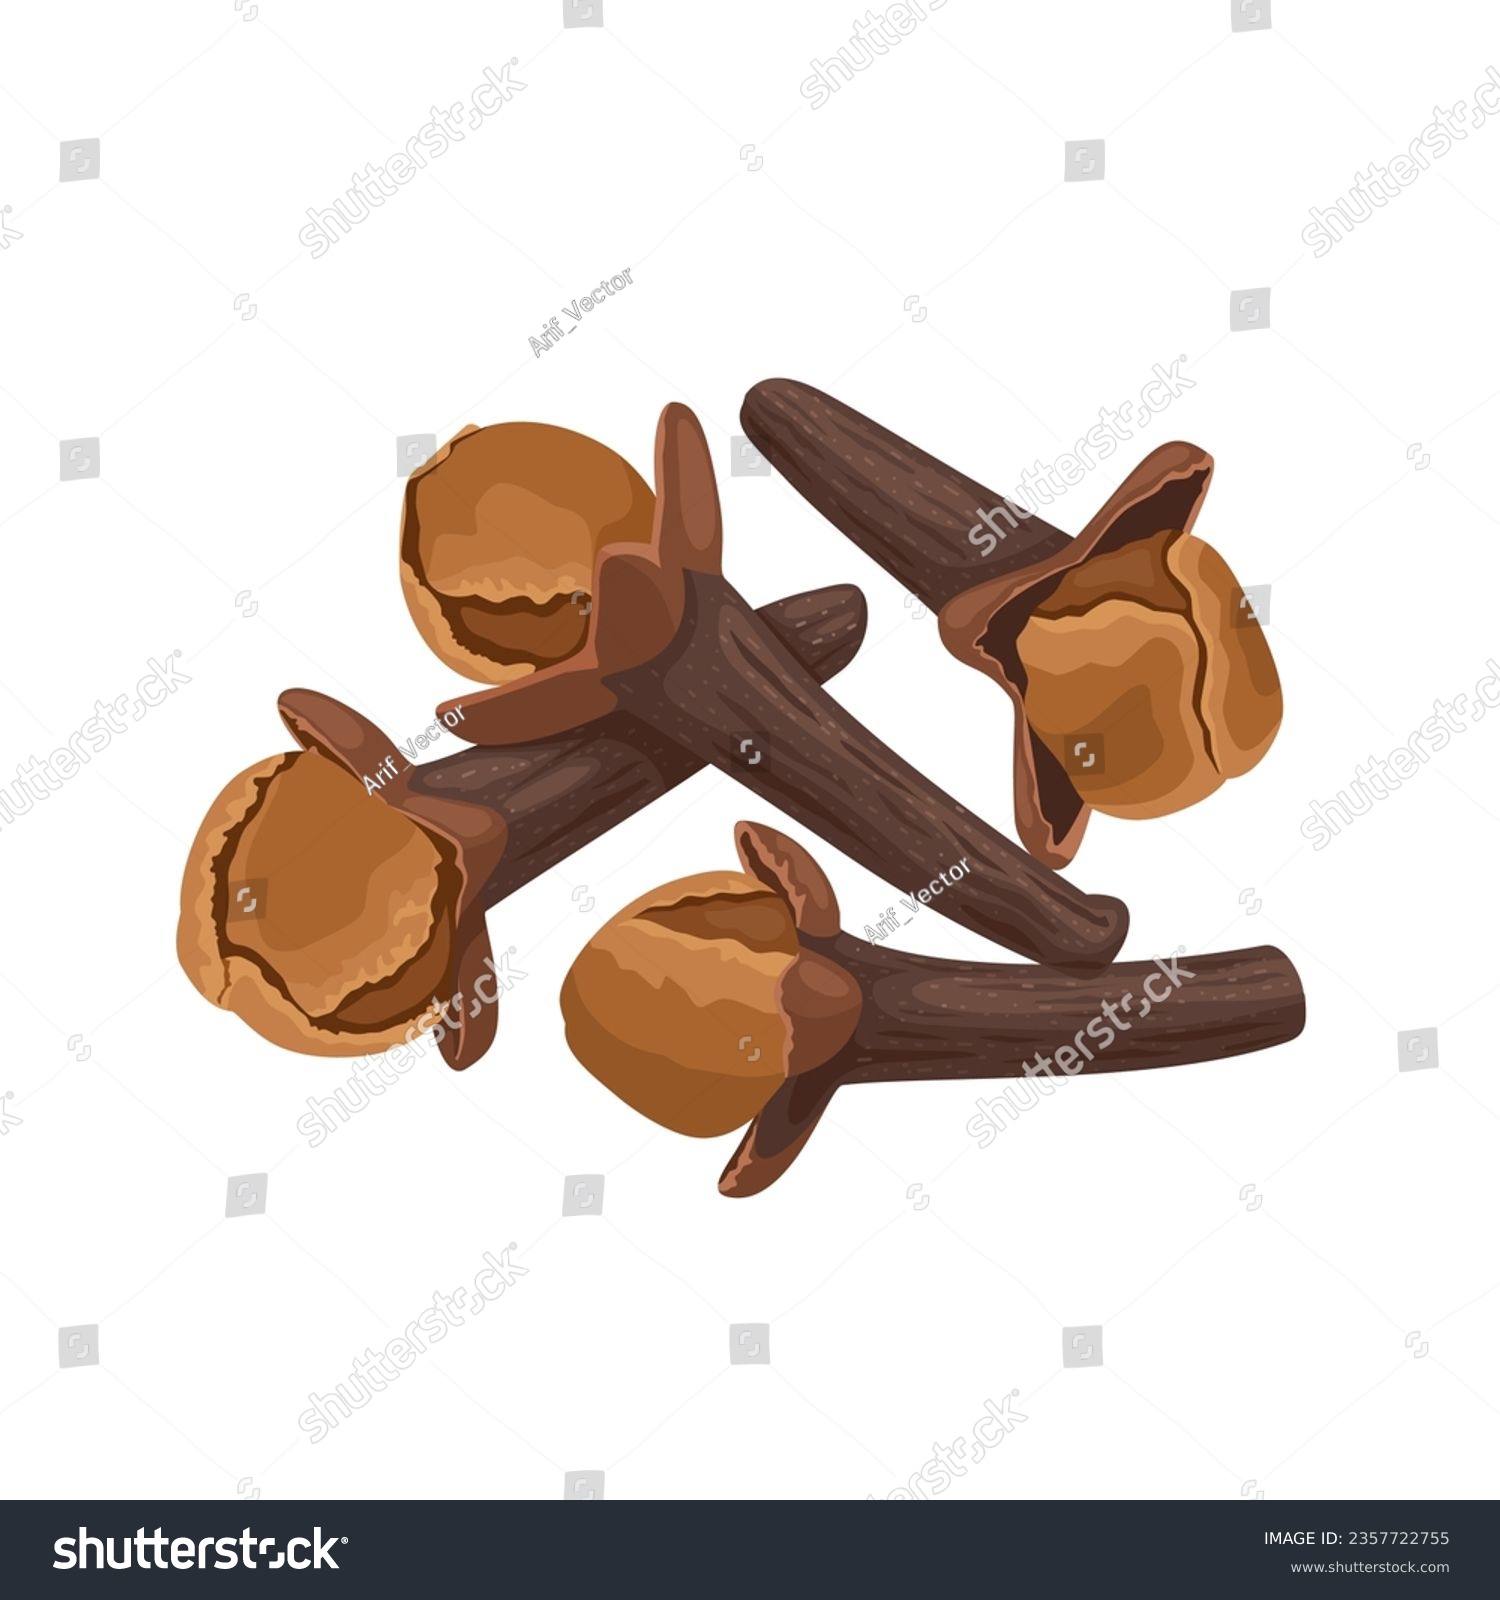 Vector illustration, dried cloves, spice from the flower bud of Syzygium aromaticum, isolated on white background. #2357722755